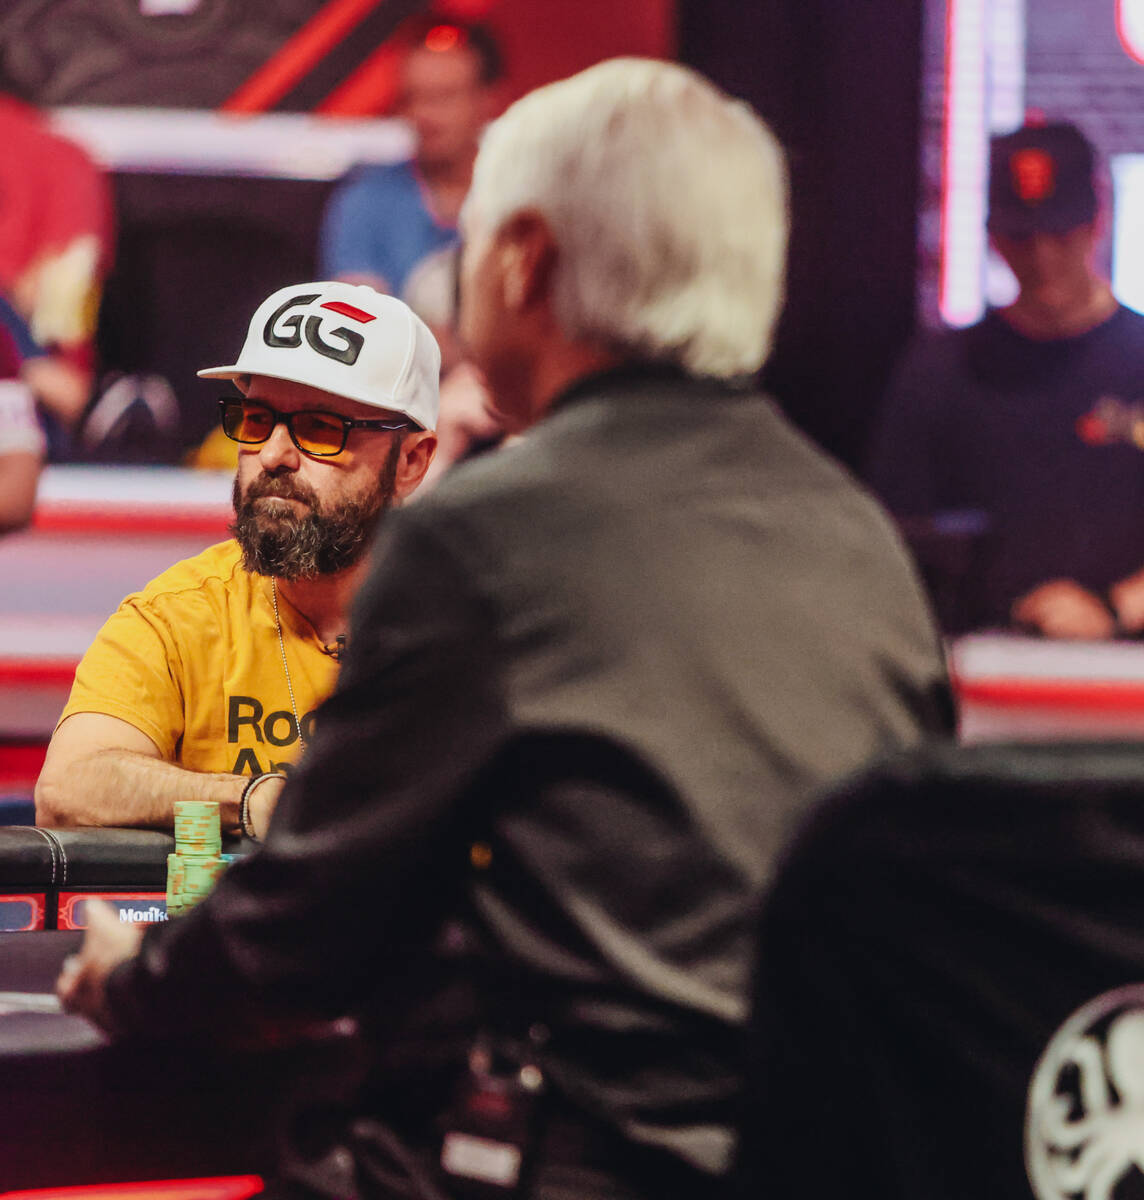 Professional poker player Daniel Negreanu competes during the final table of $50,000 buy-in dur ...